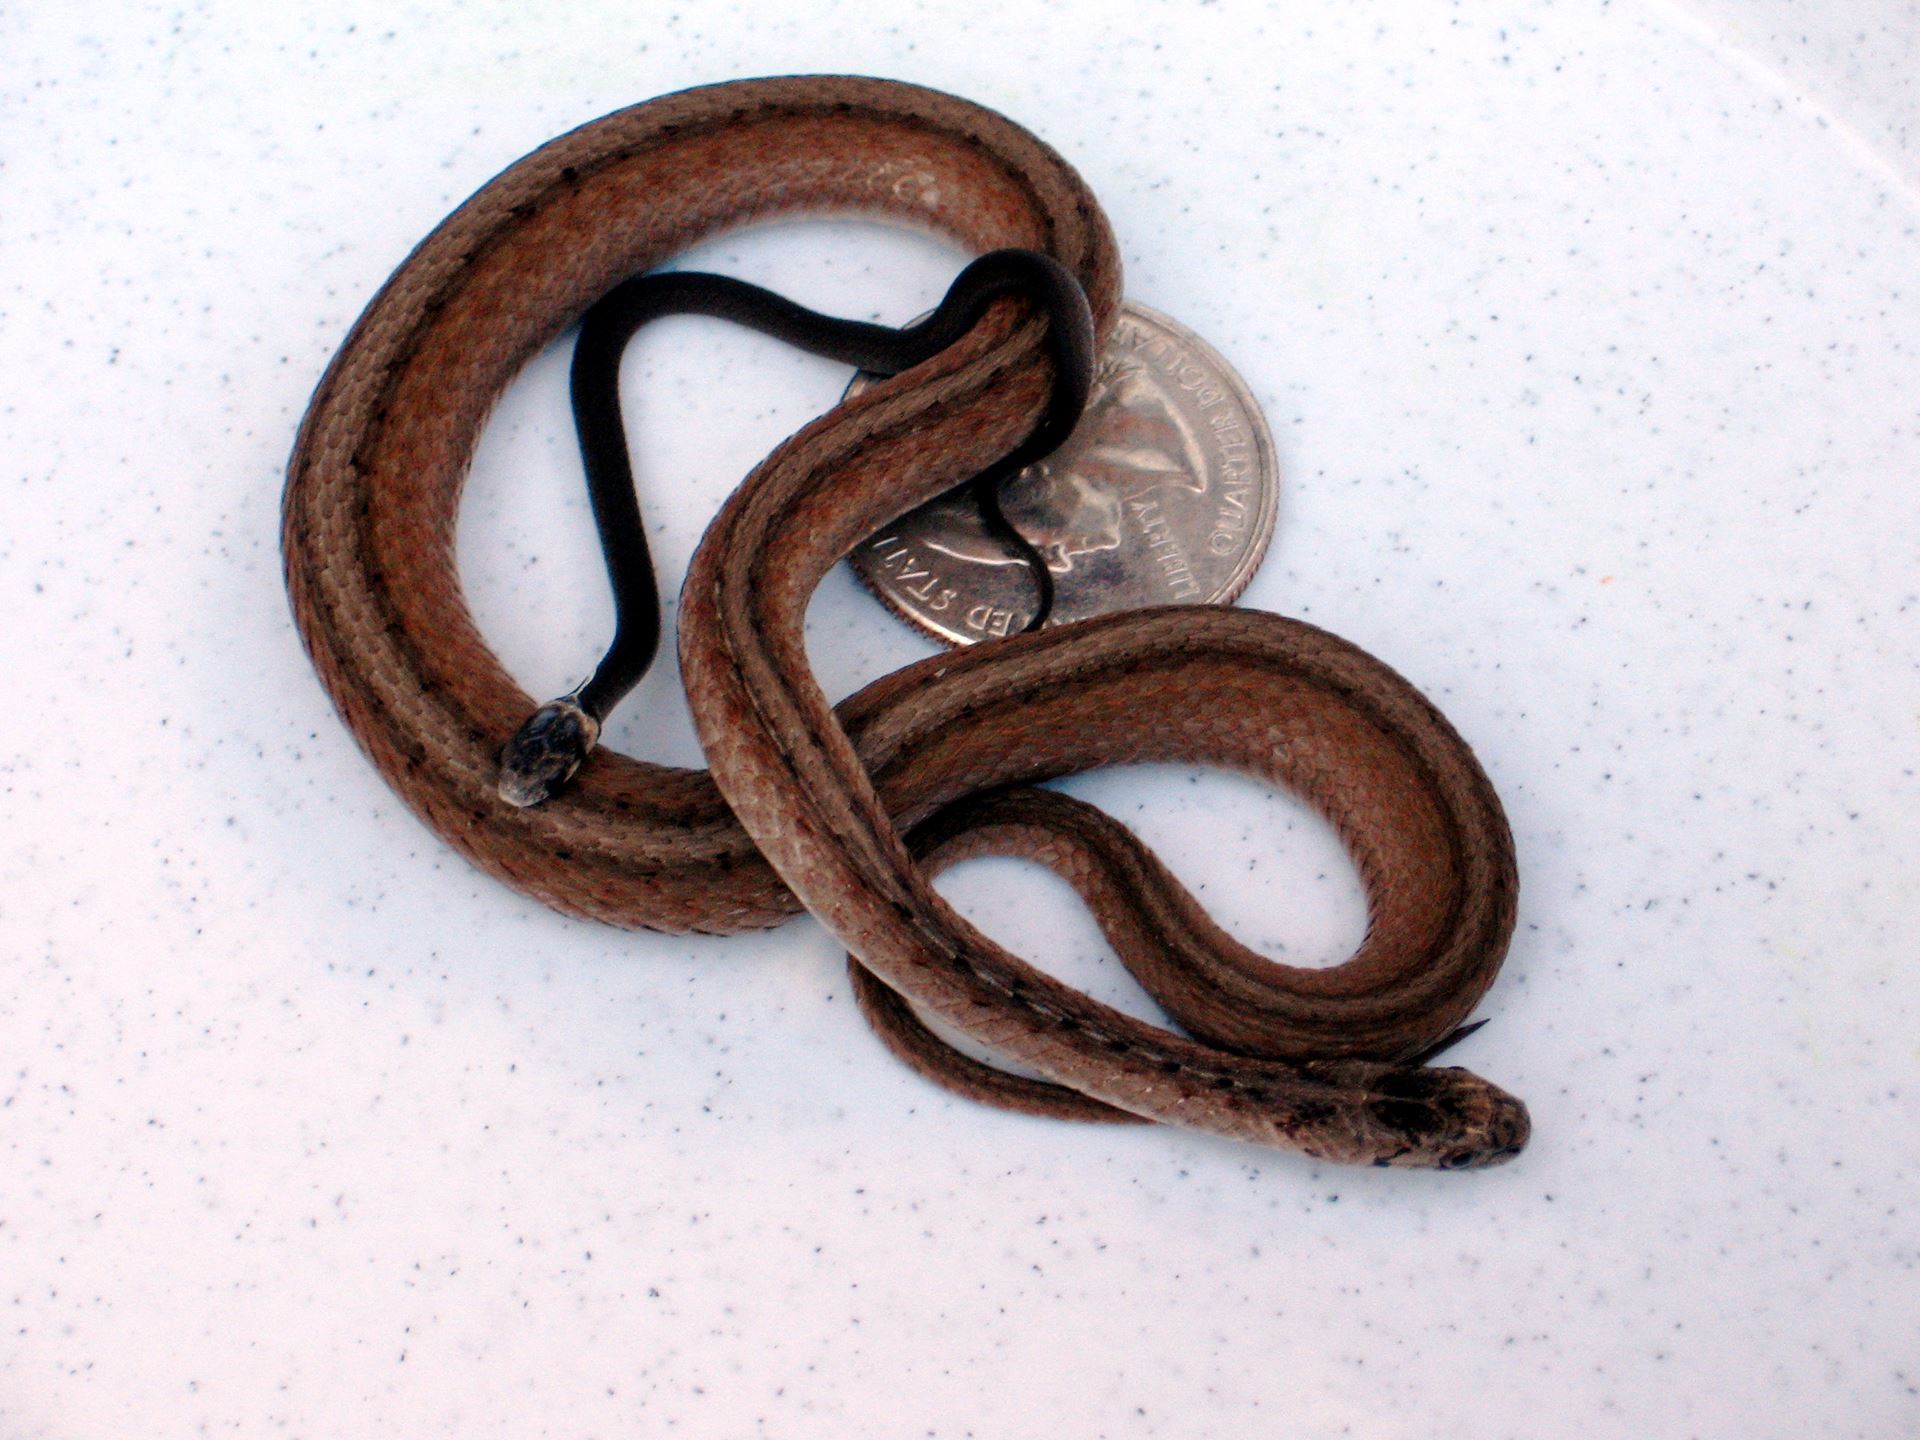 eastern brown snake with a coin